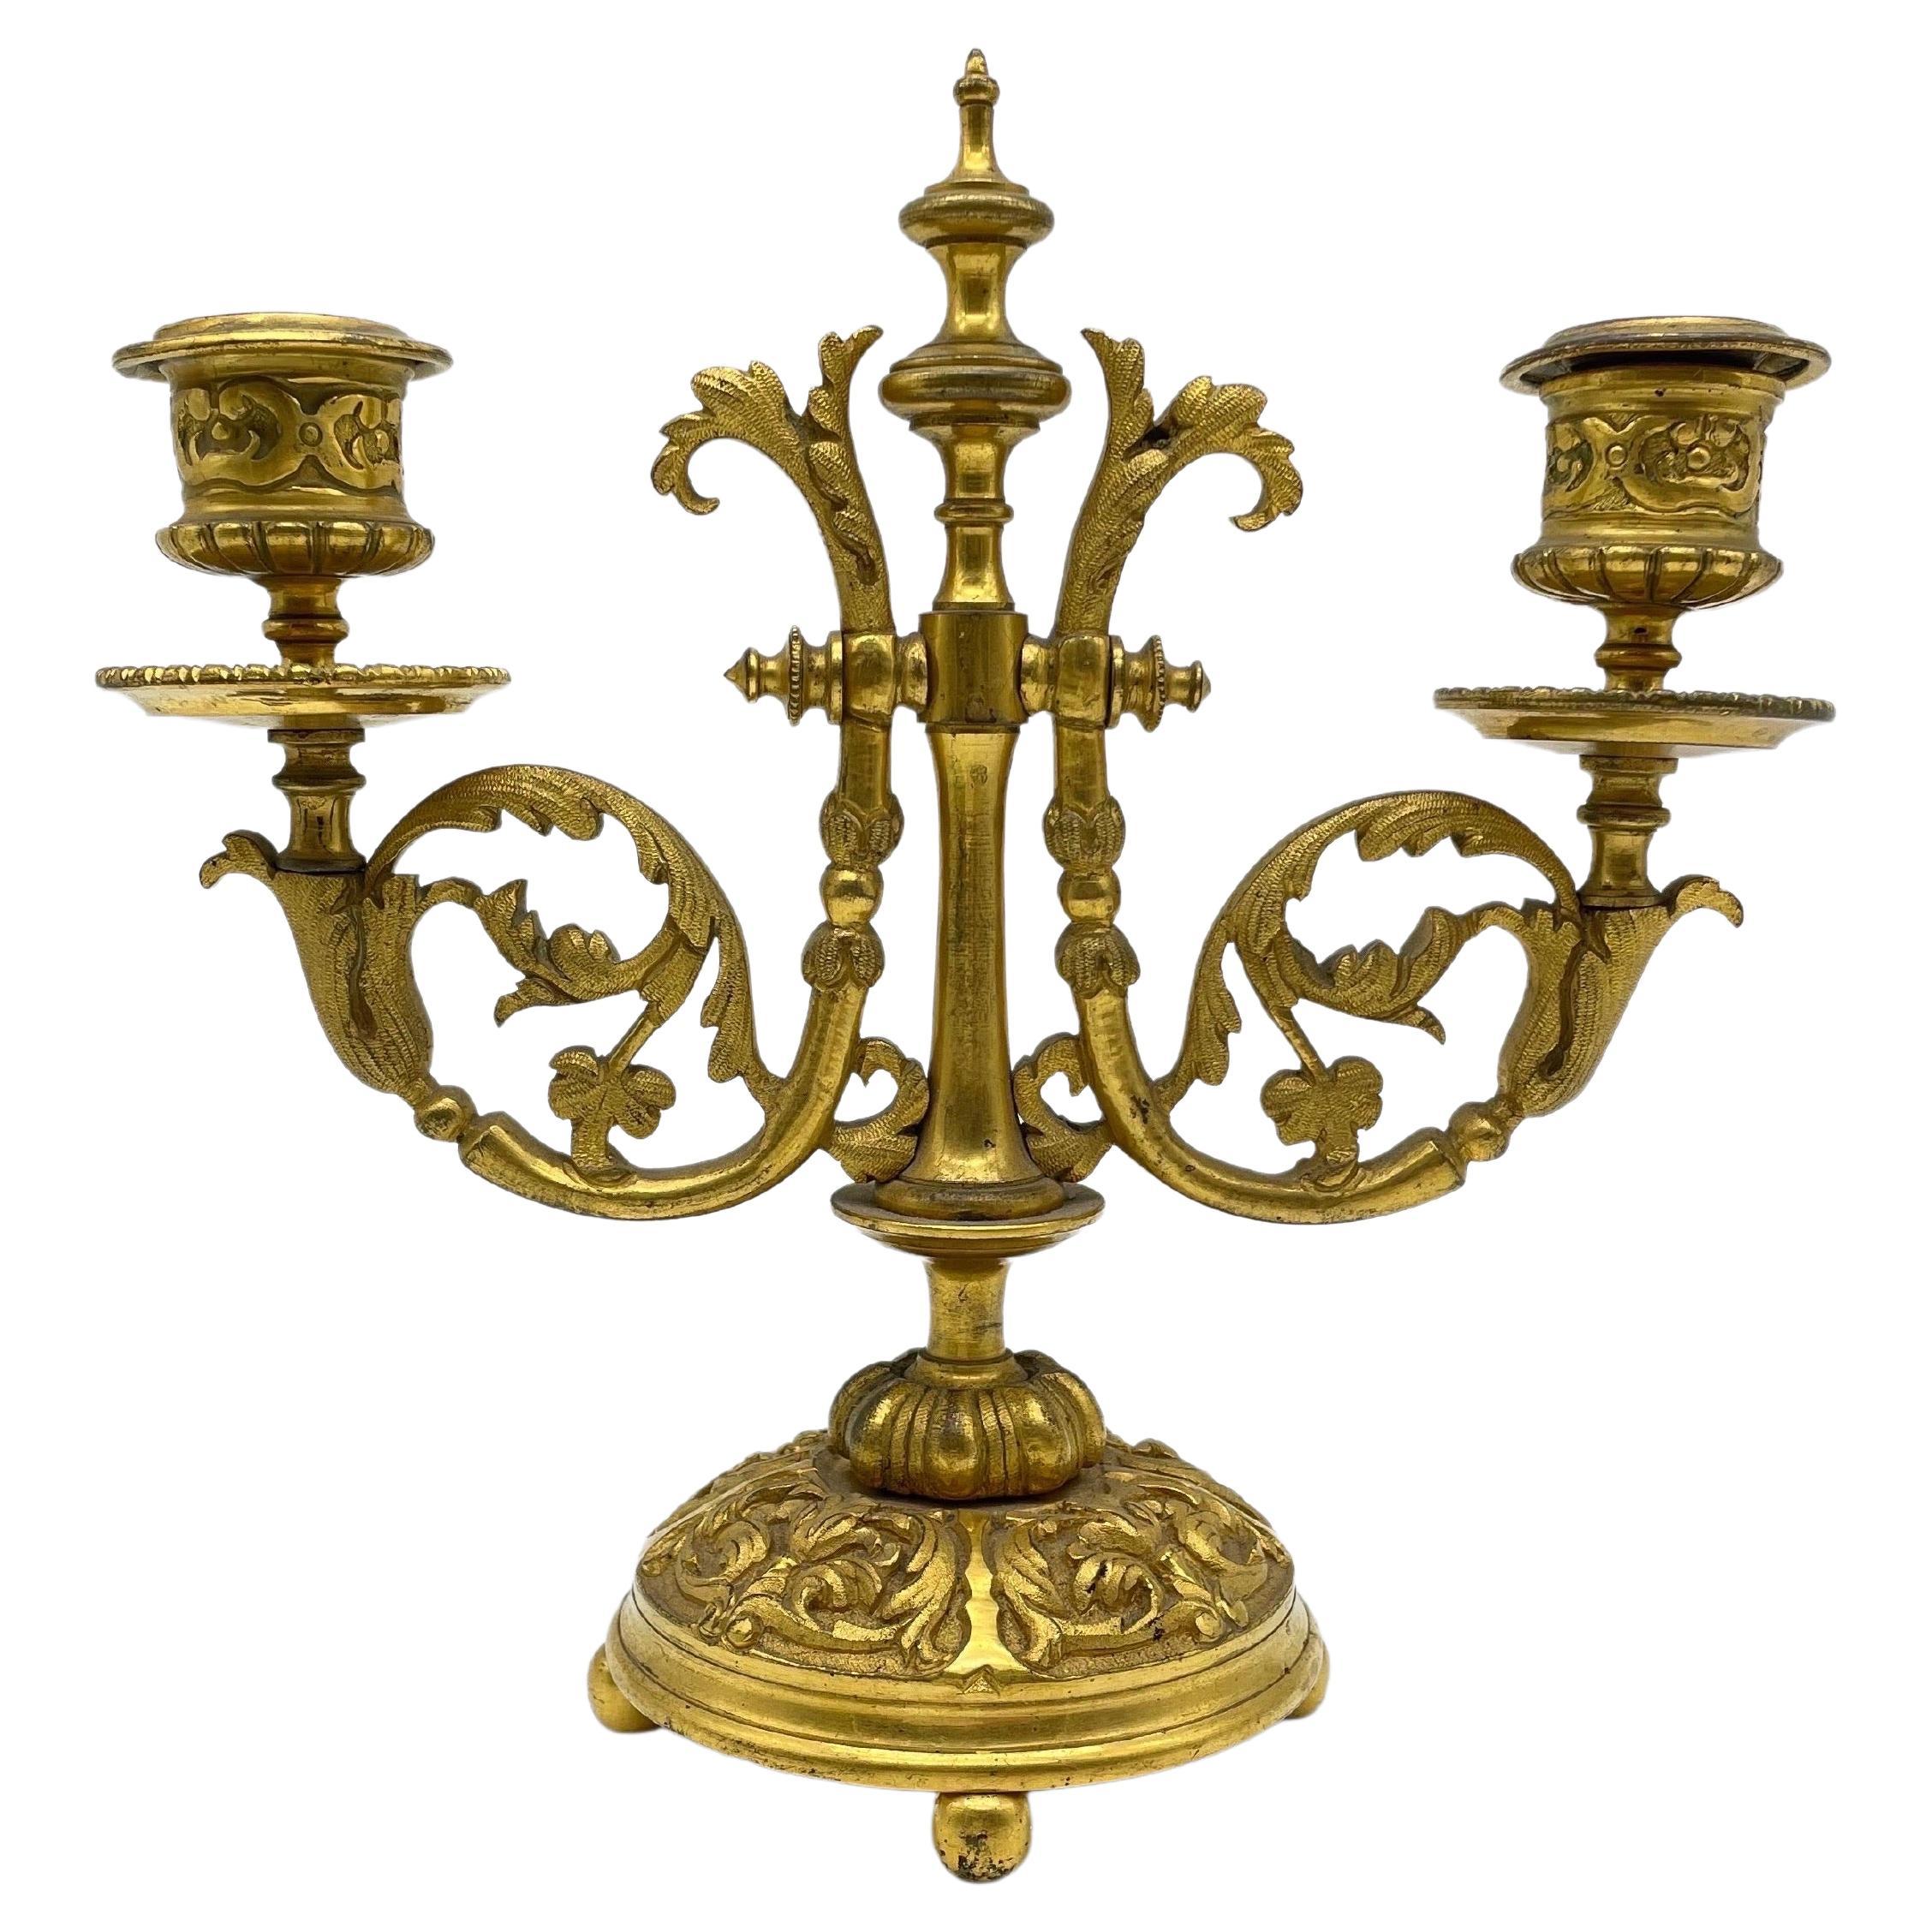 Noble neoclassical candlestick, gilded bronze, around 1900